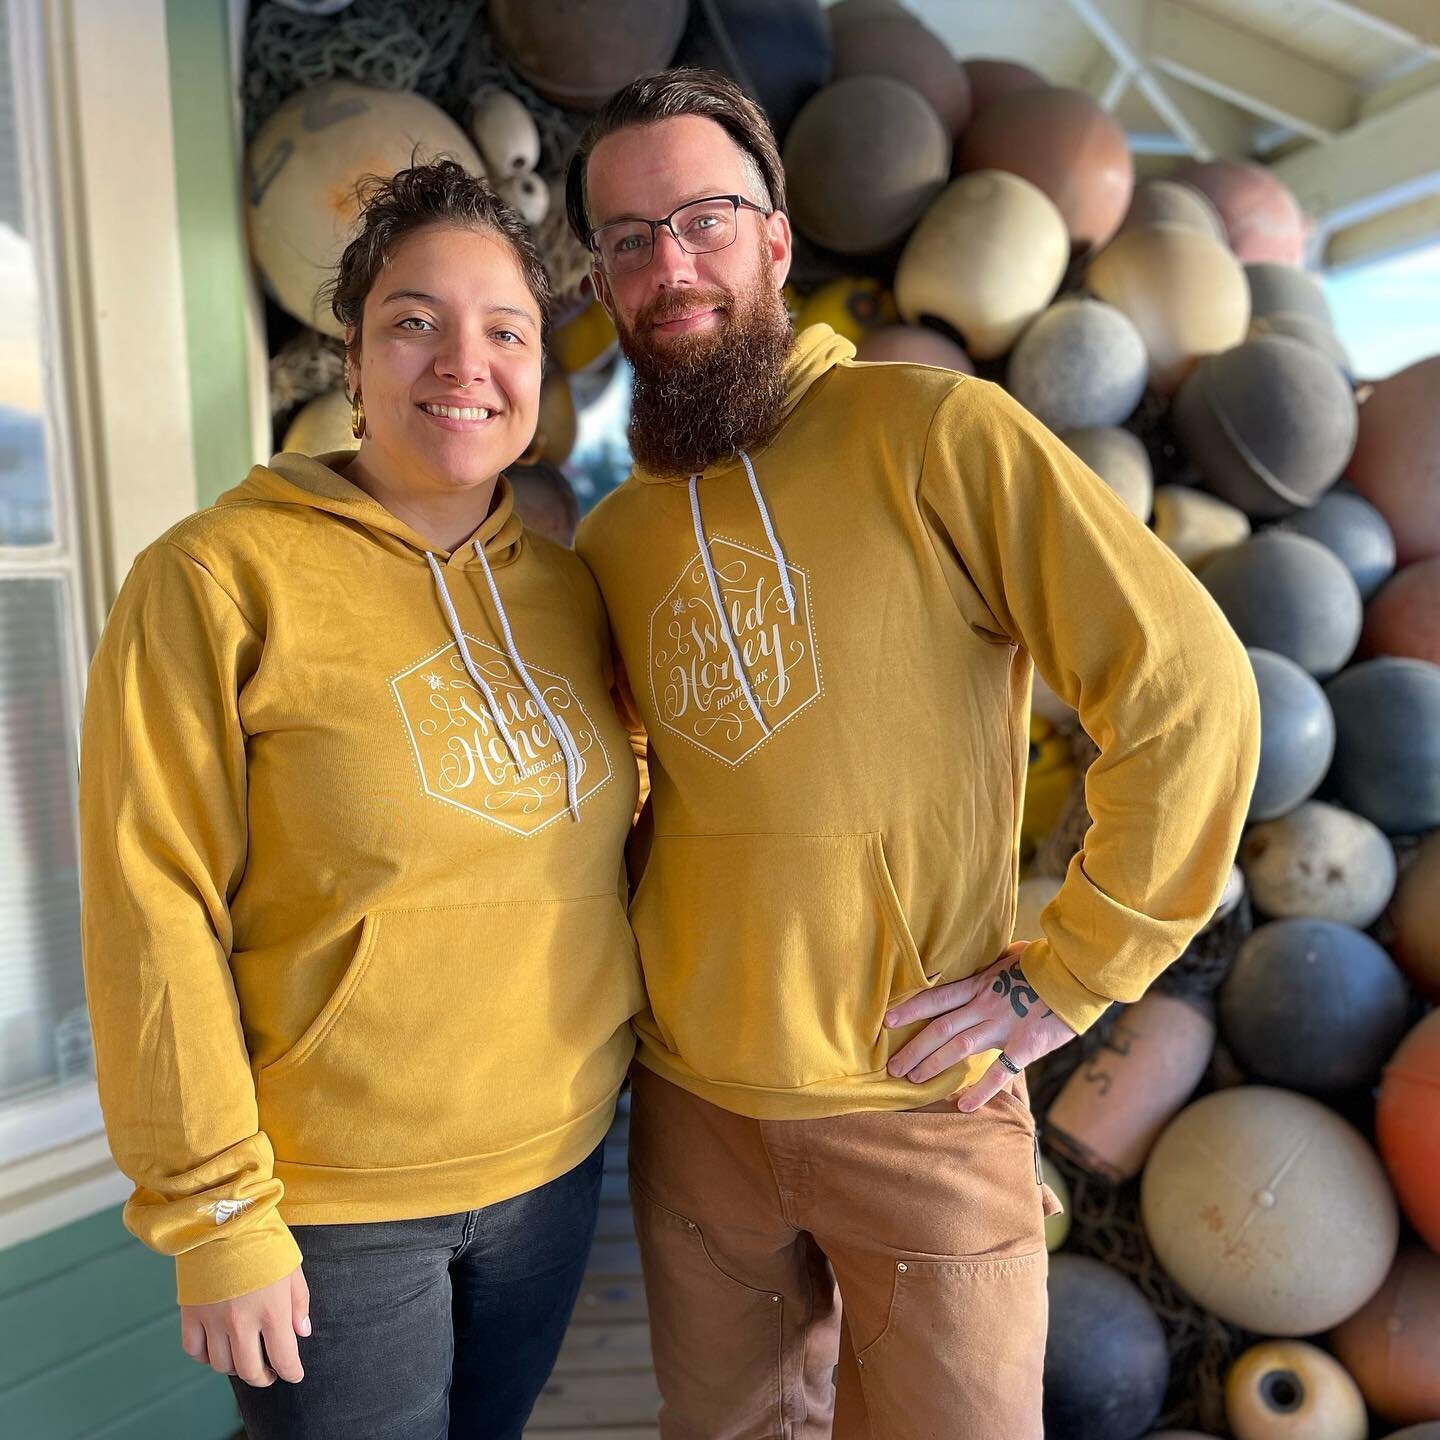 Getting ready to start your Christmas shopping and know someone in need of a cozy local hoodie?

Wild Honey has unisex hoodies with sizes ranging from S to 2XL! Lightweight and perfect on its own or layered under a jacket, our hoodies are a soft and 